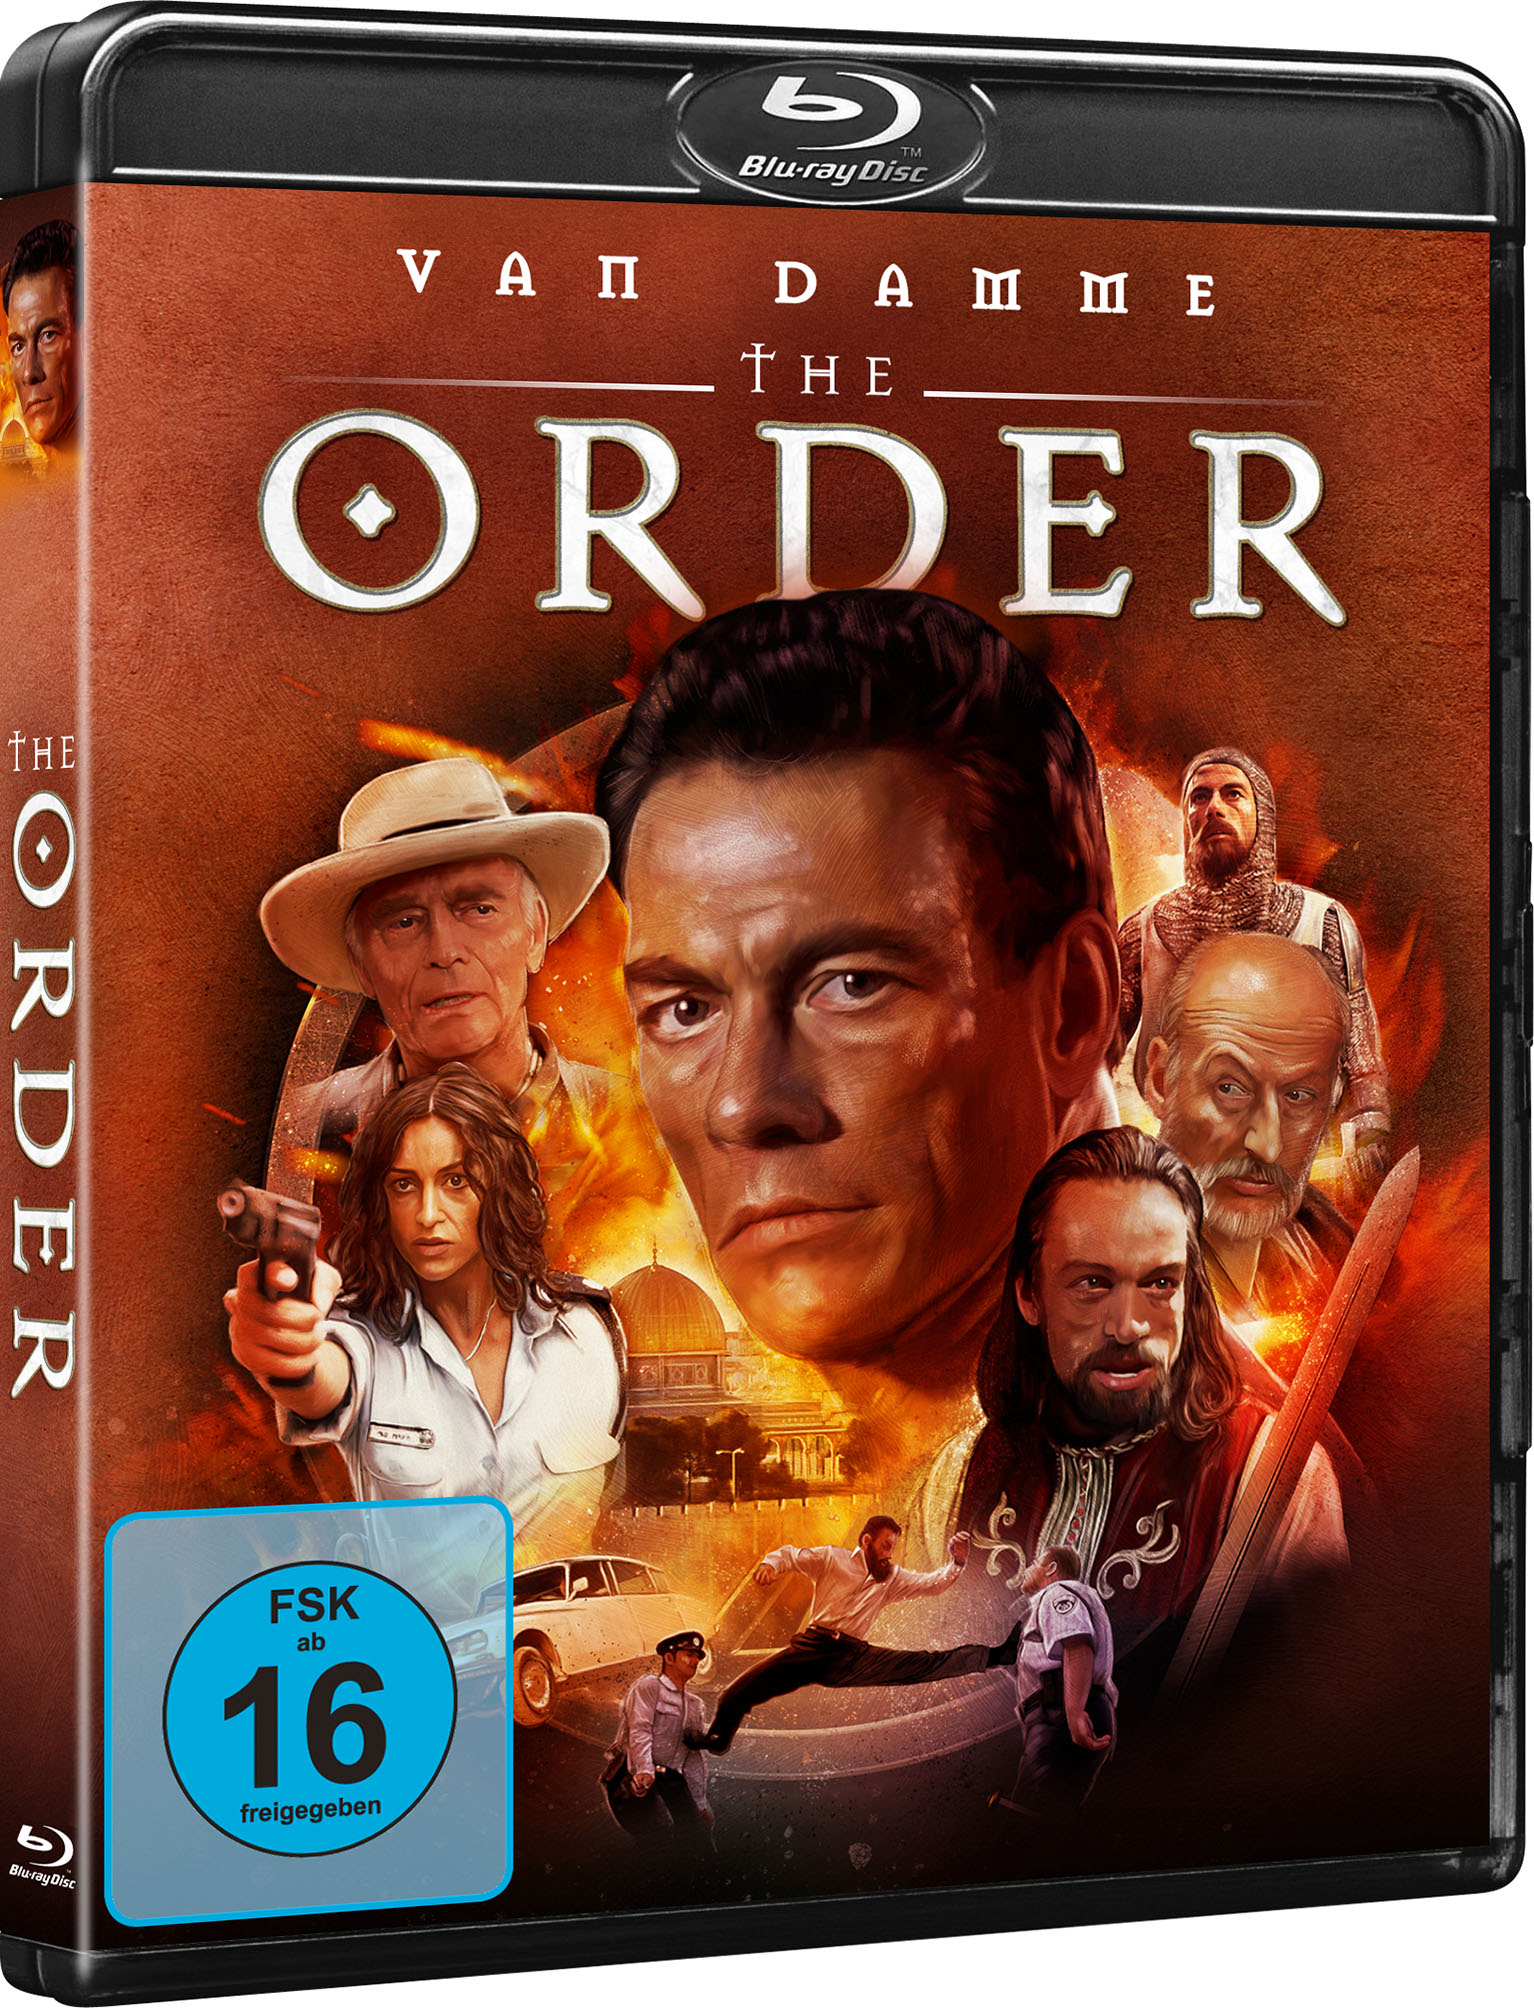 The Order (Blu-ray) Image 2